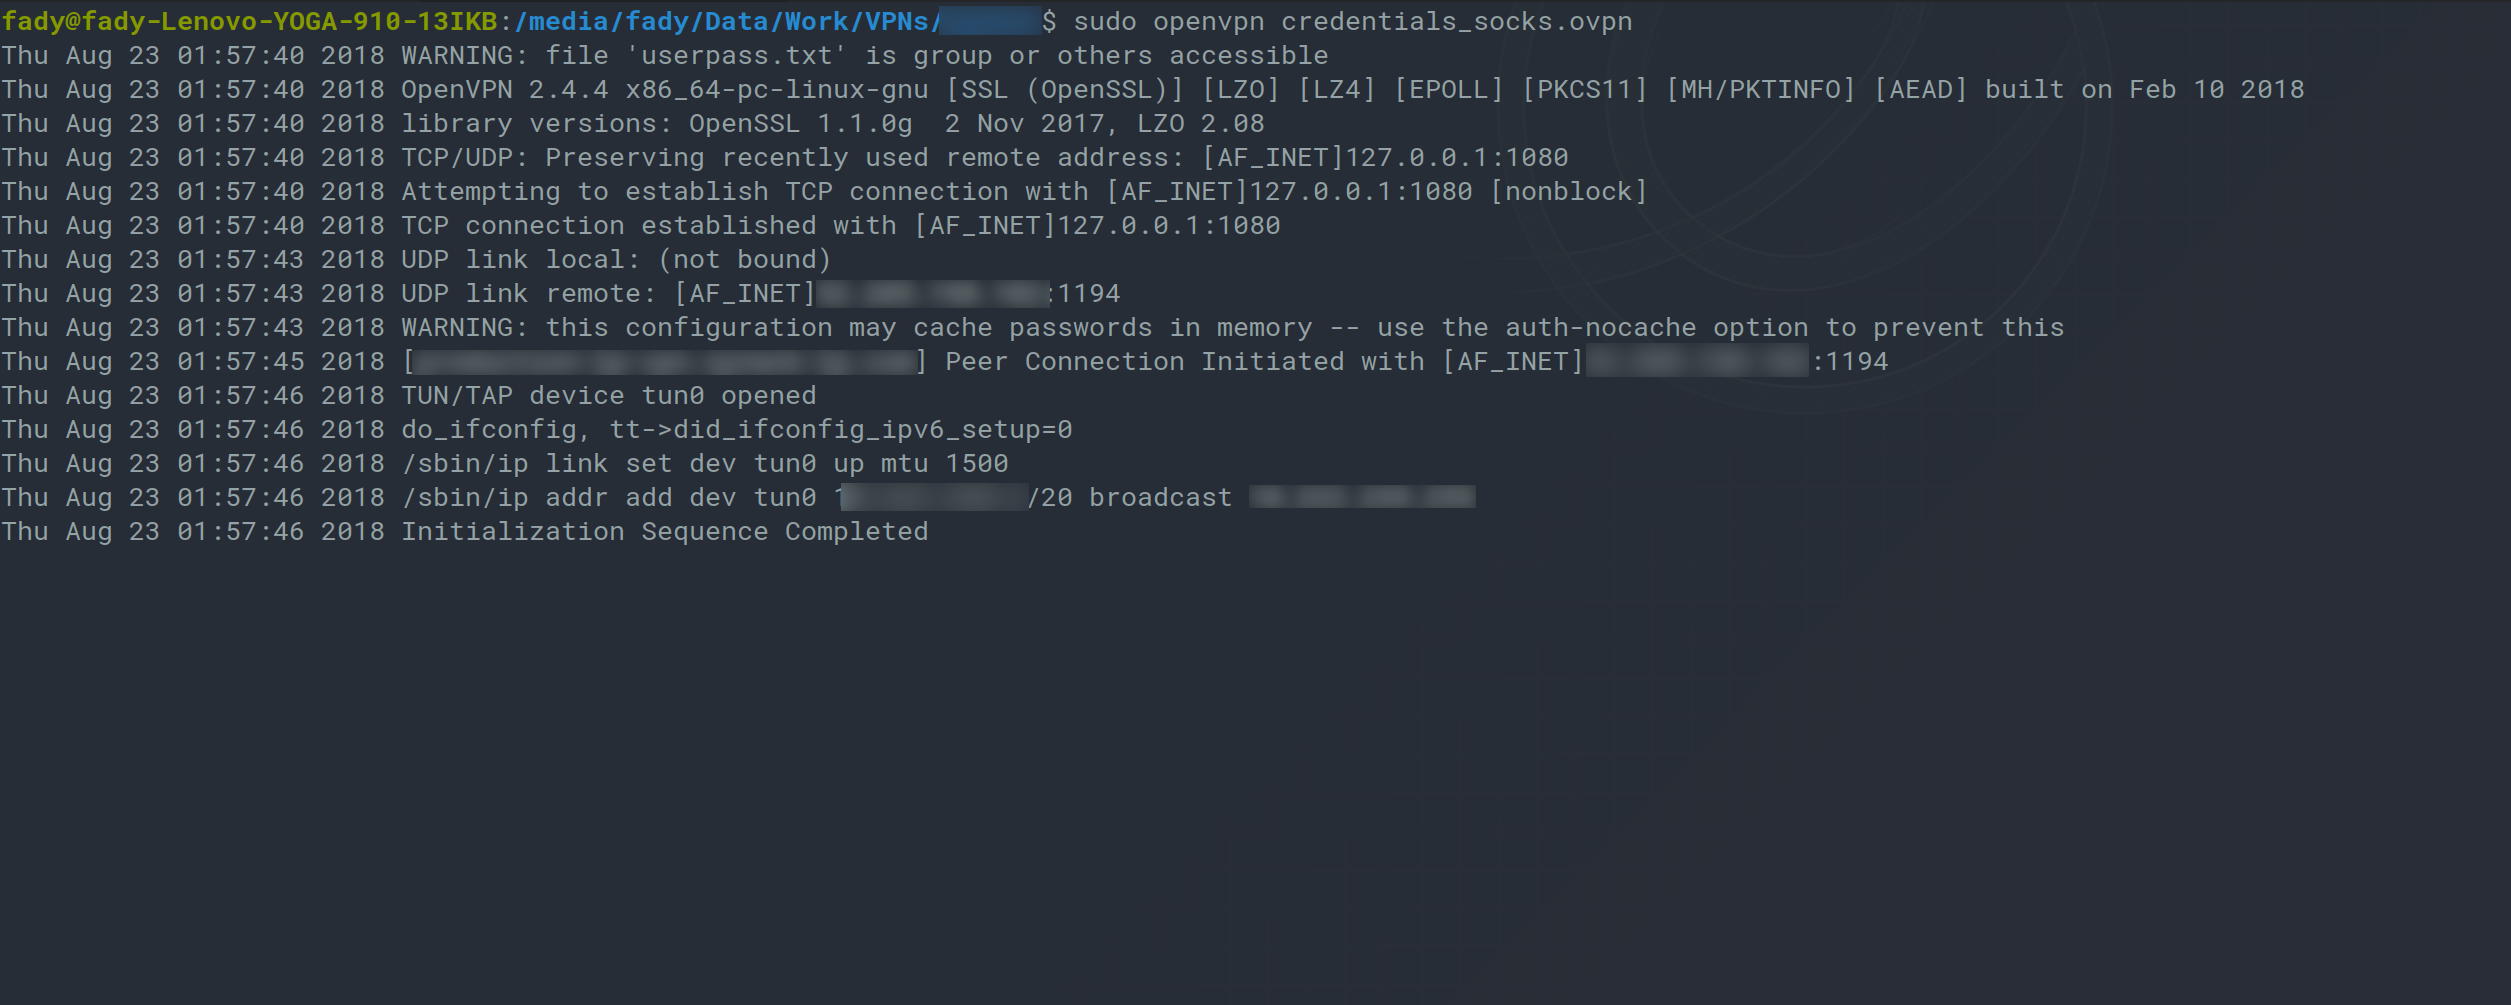 Using ShadowSocks to Bypass OpenVPN Restrictions (Works in Egypt)